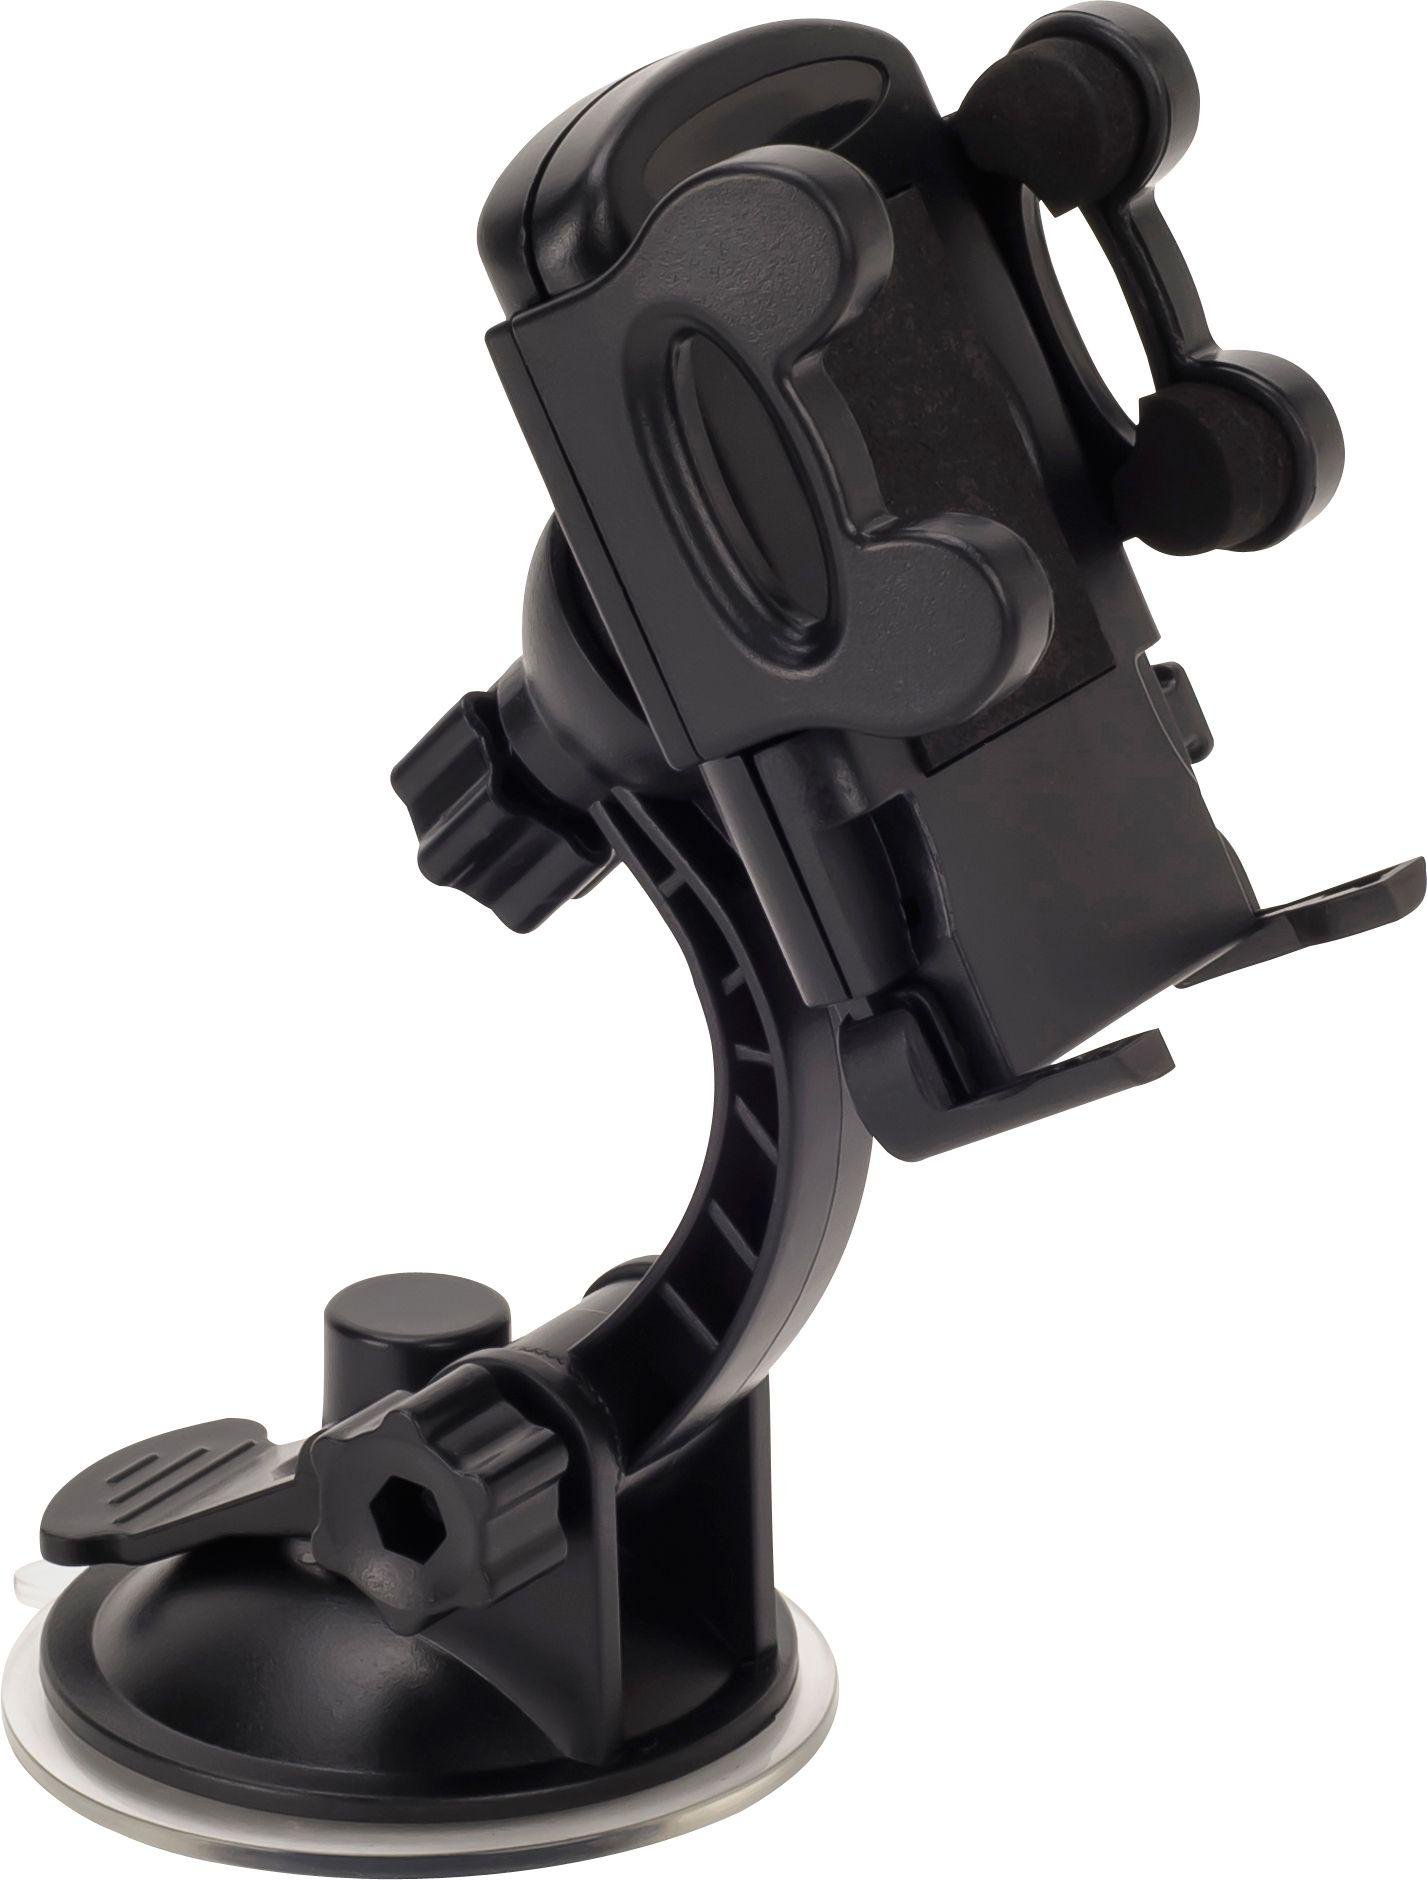 Universal In Car Mobile Phone Holder Review